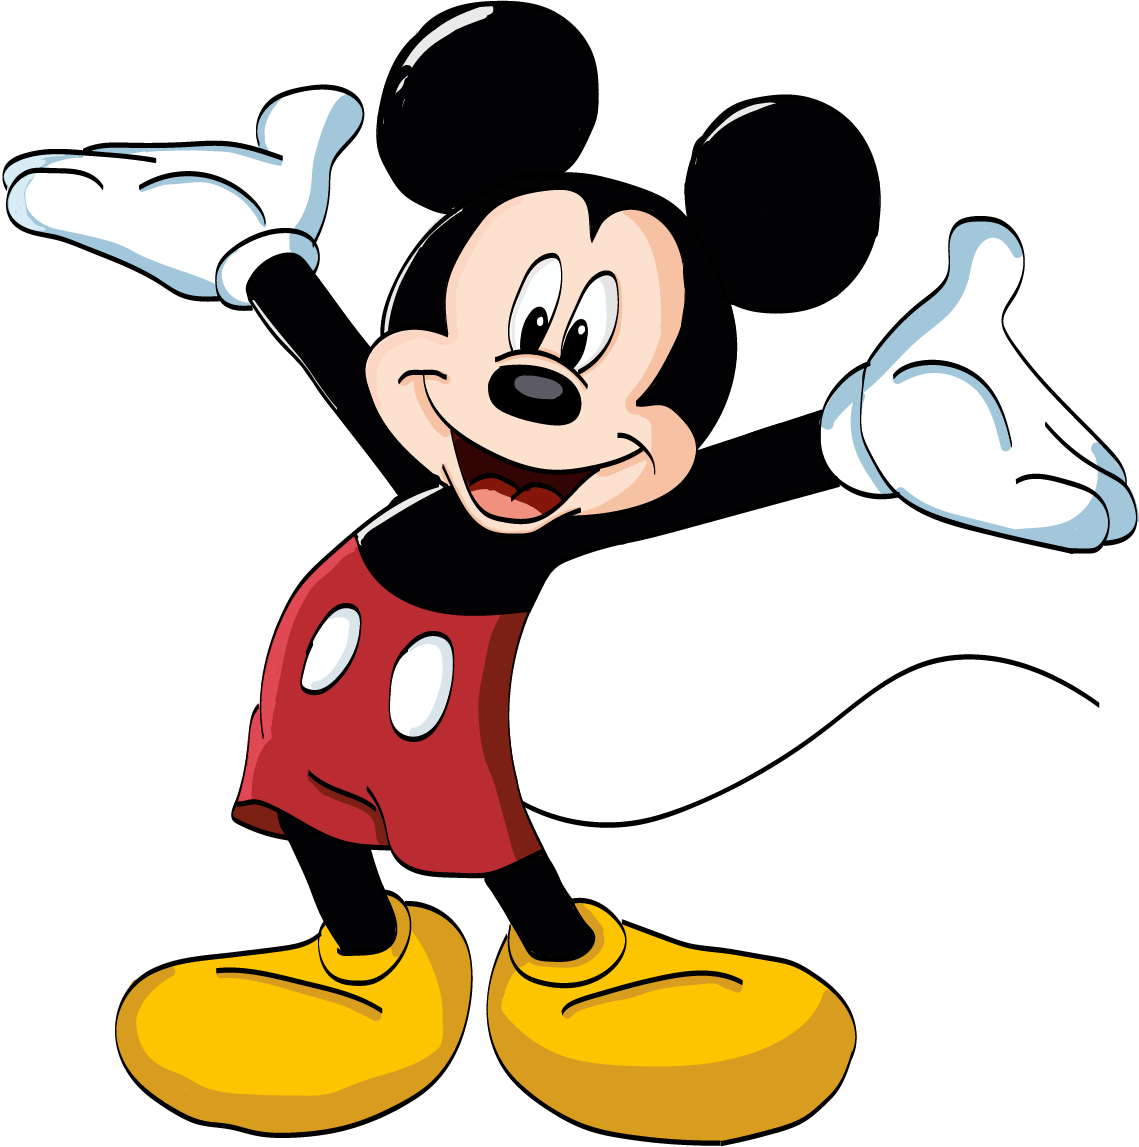 Mickey Mouse by Cart00nman95 on DeviantArt